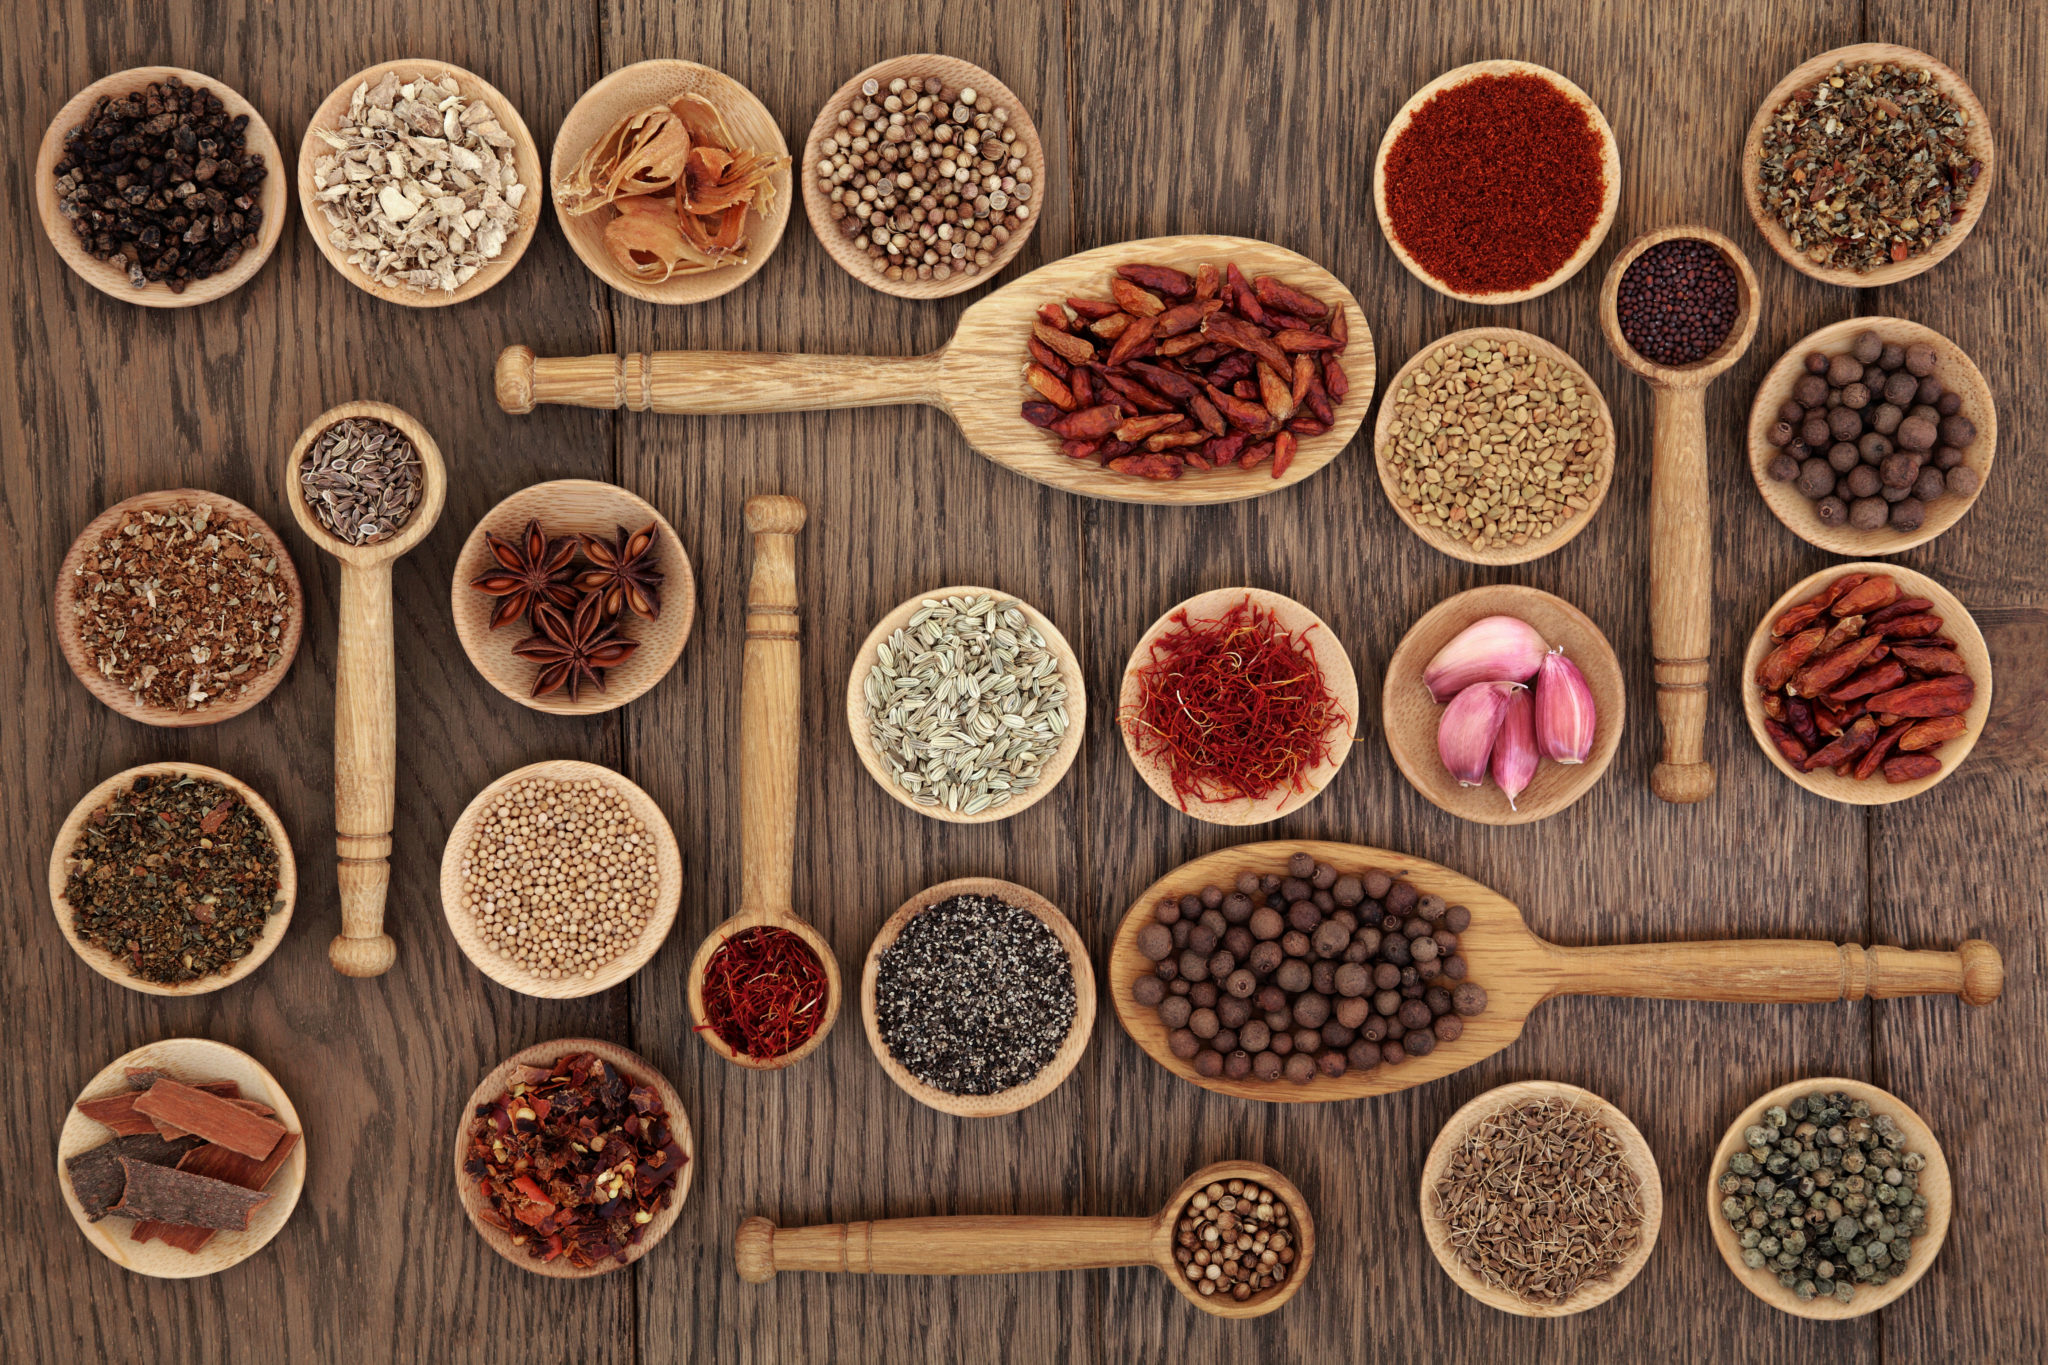 The Top Ten Kitchen Must-Haves: Spice & Herb Edition